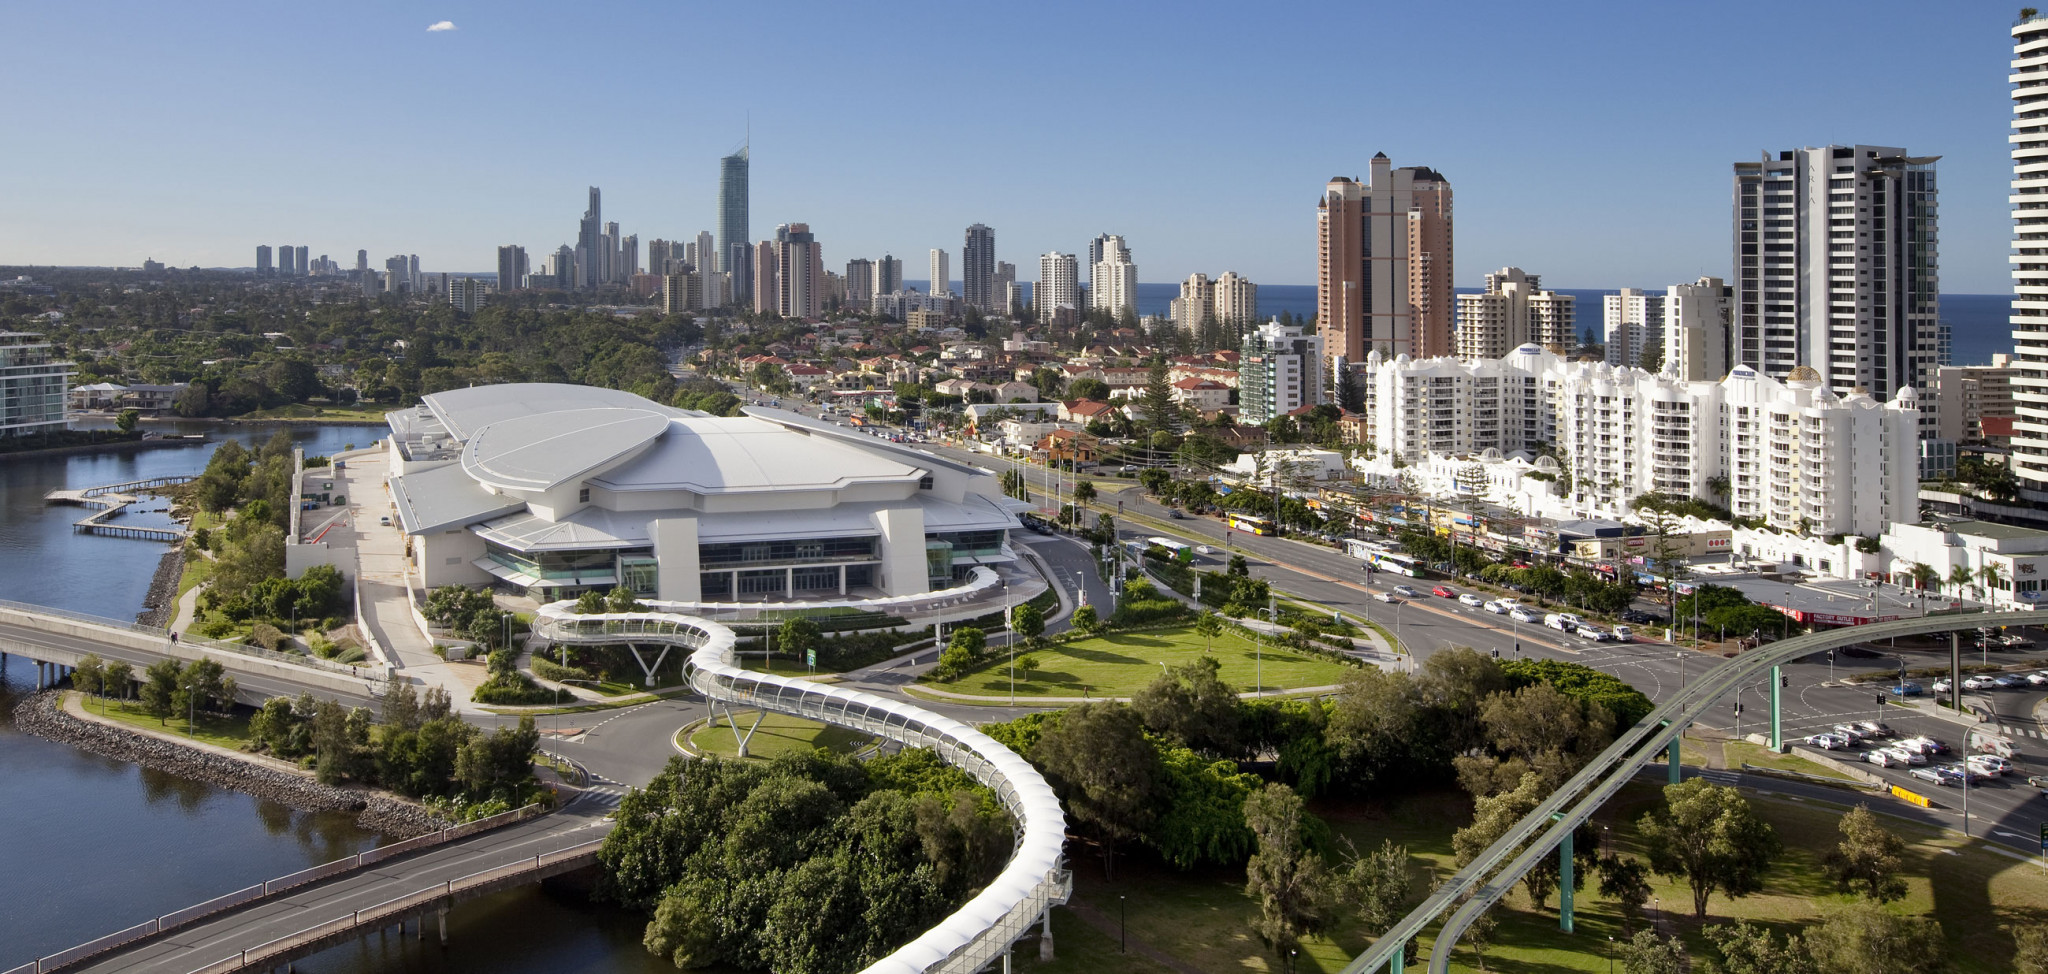 This year's SportAccord Summit is being held at the at the Gold Coast Convention and Exhibition Centre